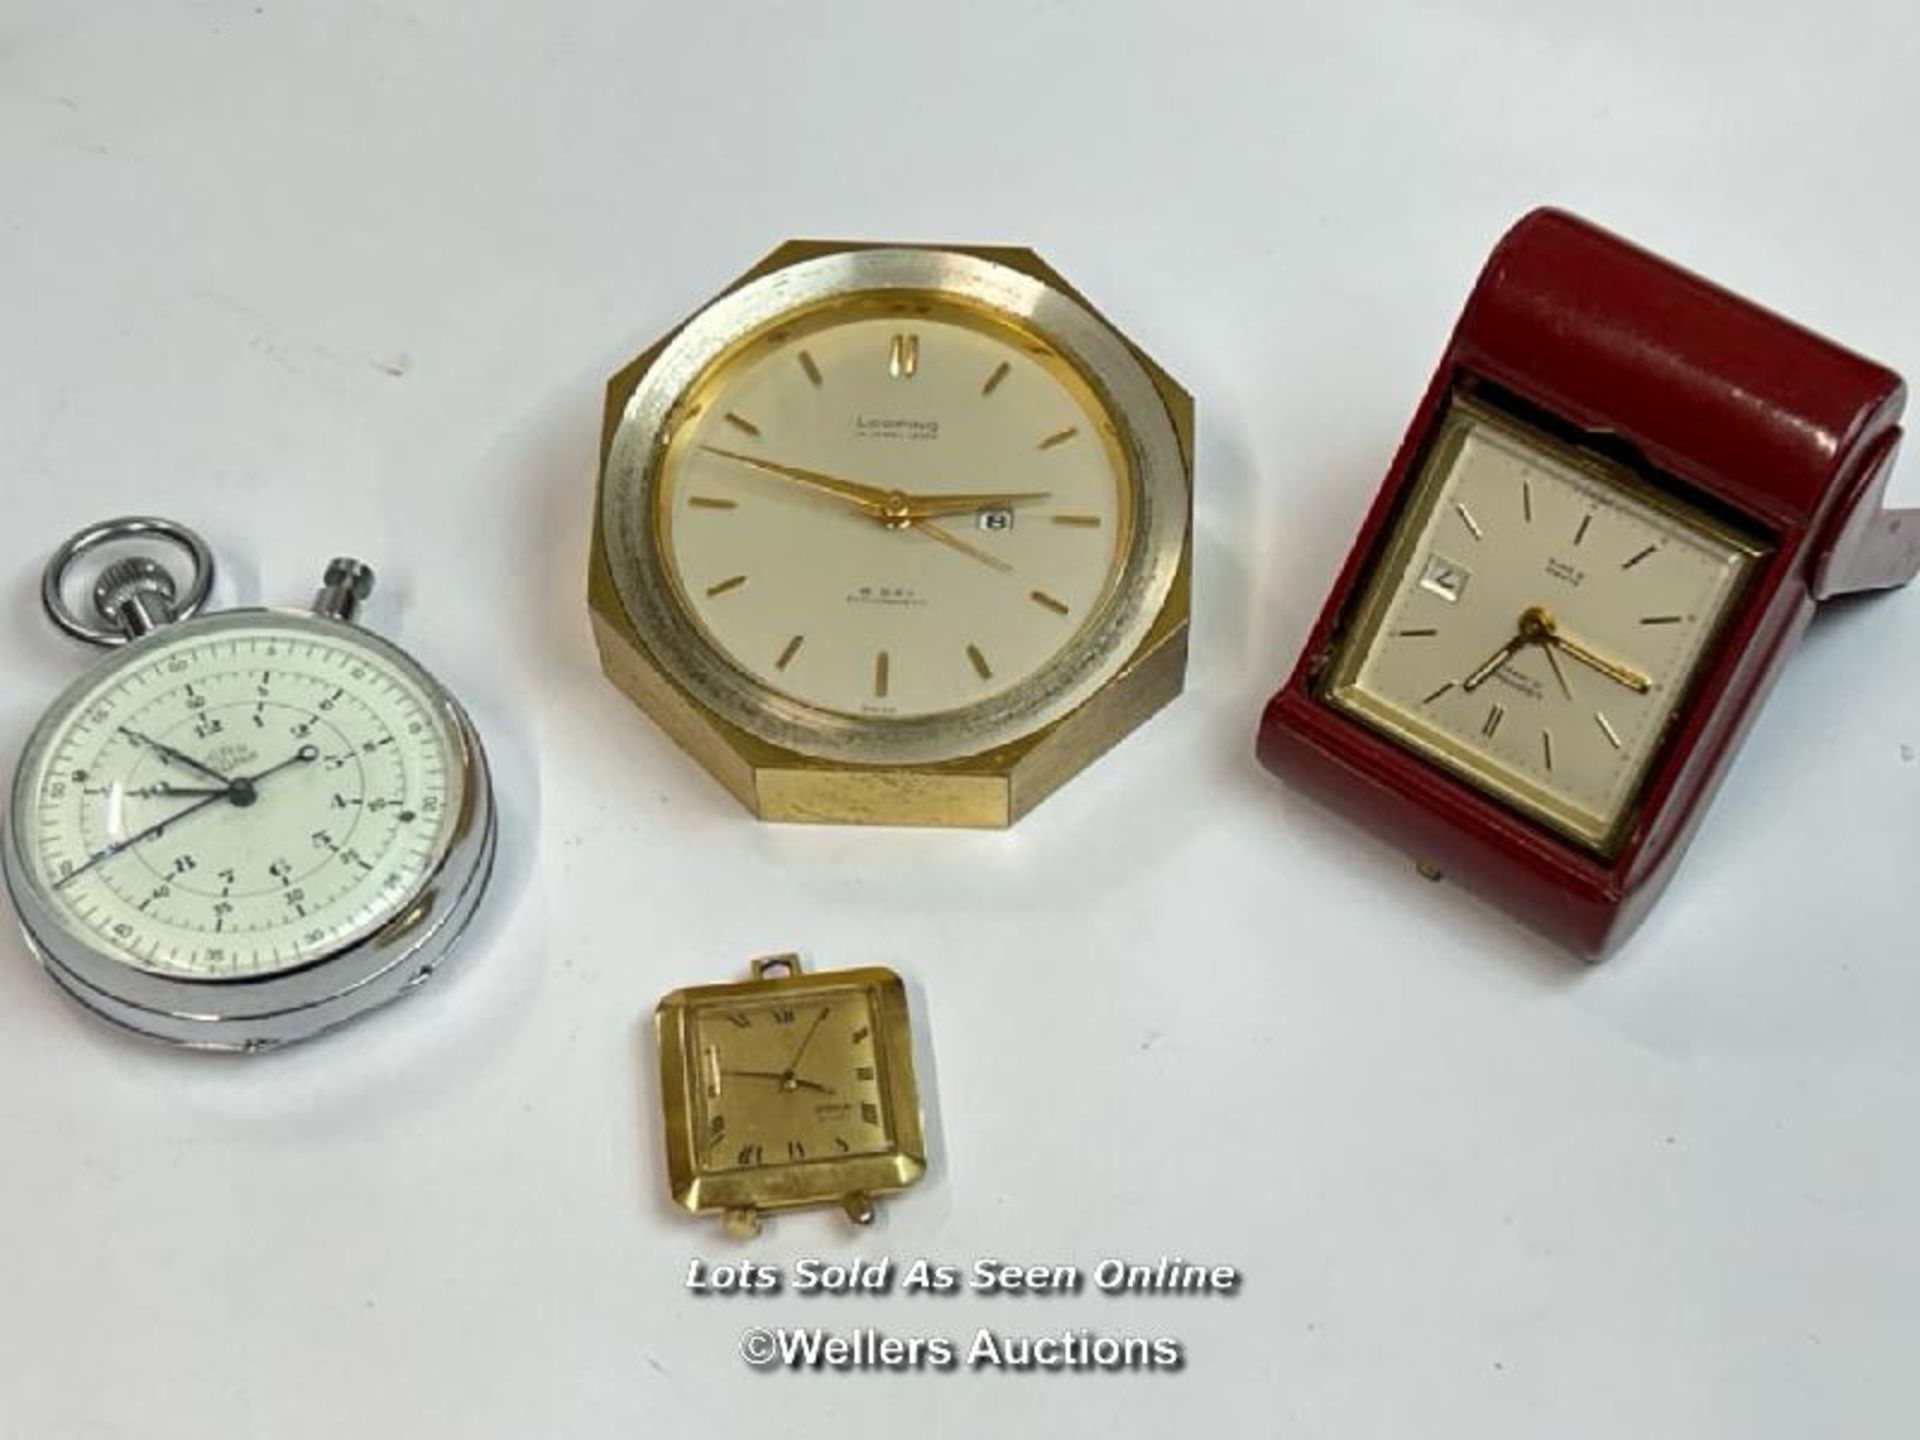 Vintage Nero stop watch, two small clocks by Looping and a small travel alarm clock by Doxa (4) /